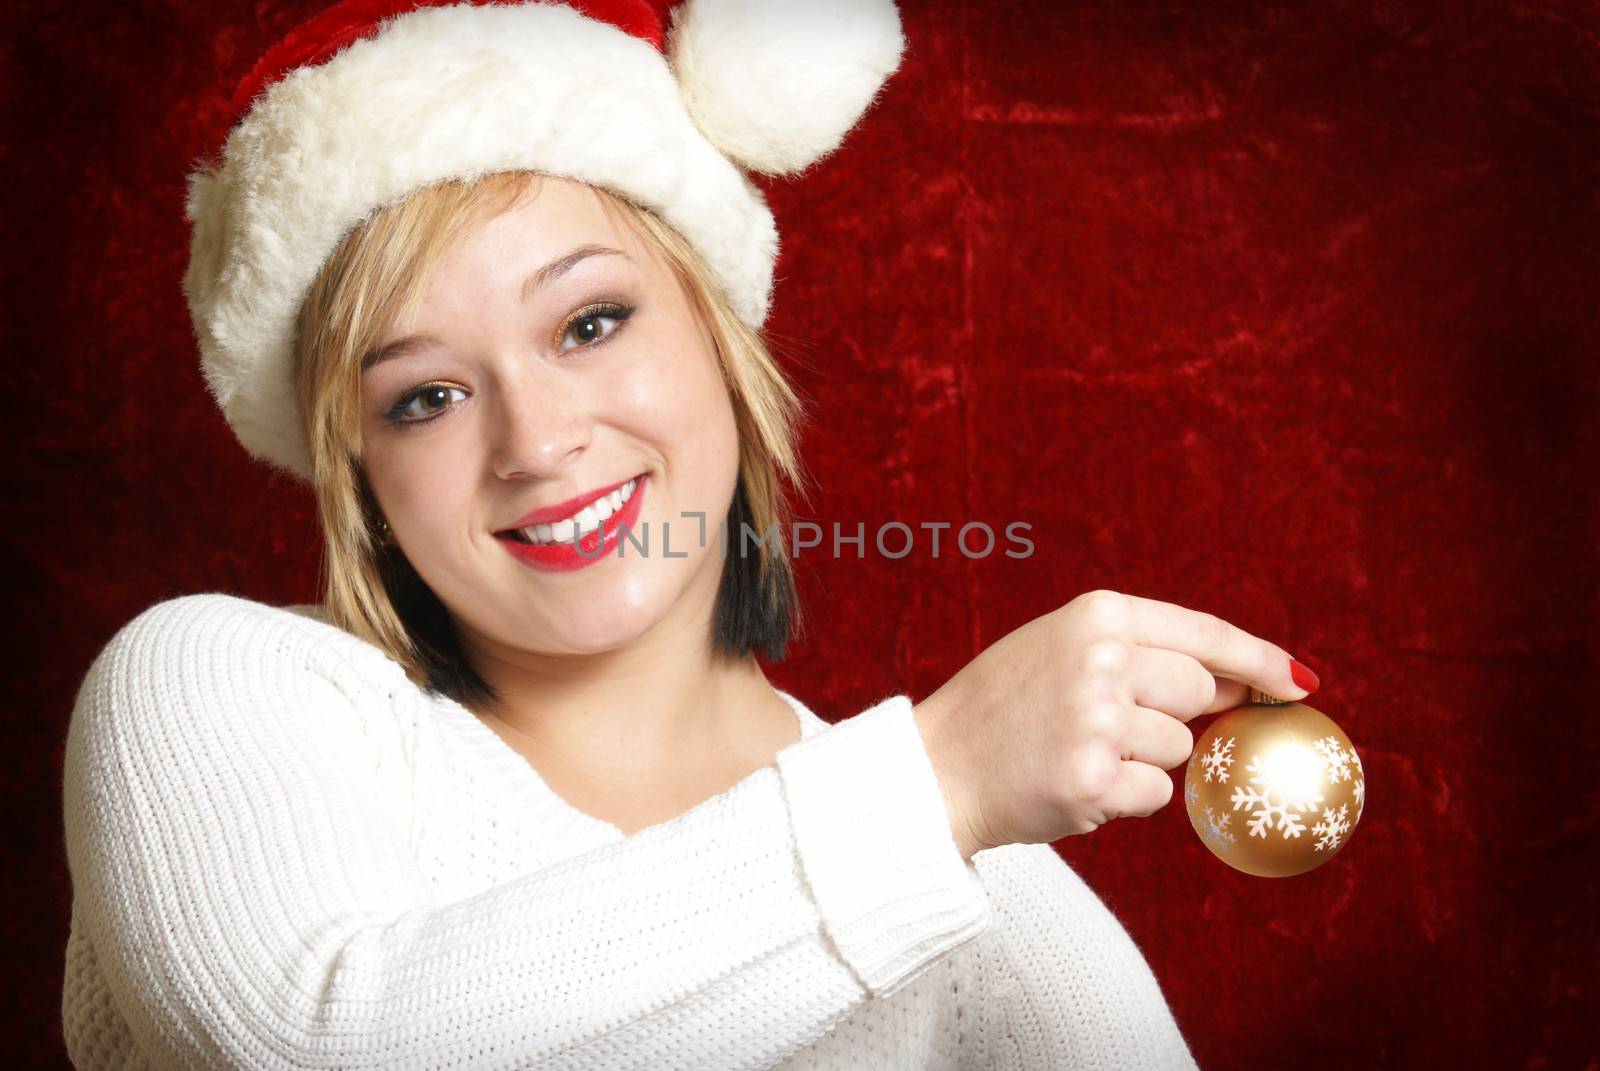 A beautiful woman holds a Christmas bauble as she gets ready to decorate.